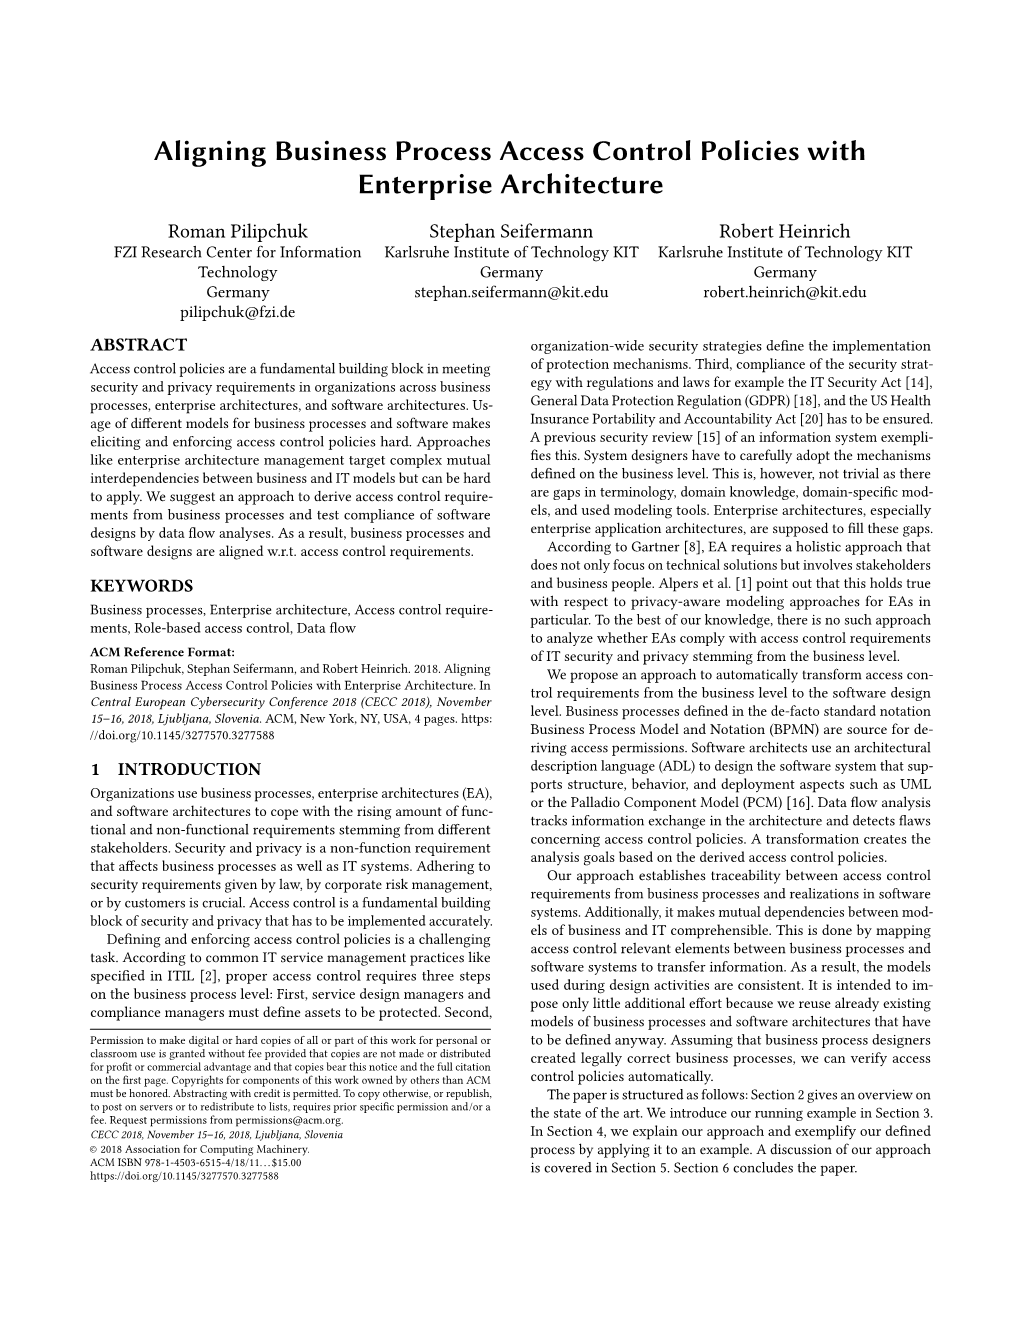 Aligning Business Process Access Control Policies with Enterprise Architecture